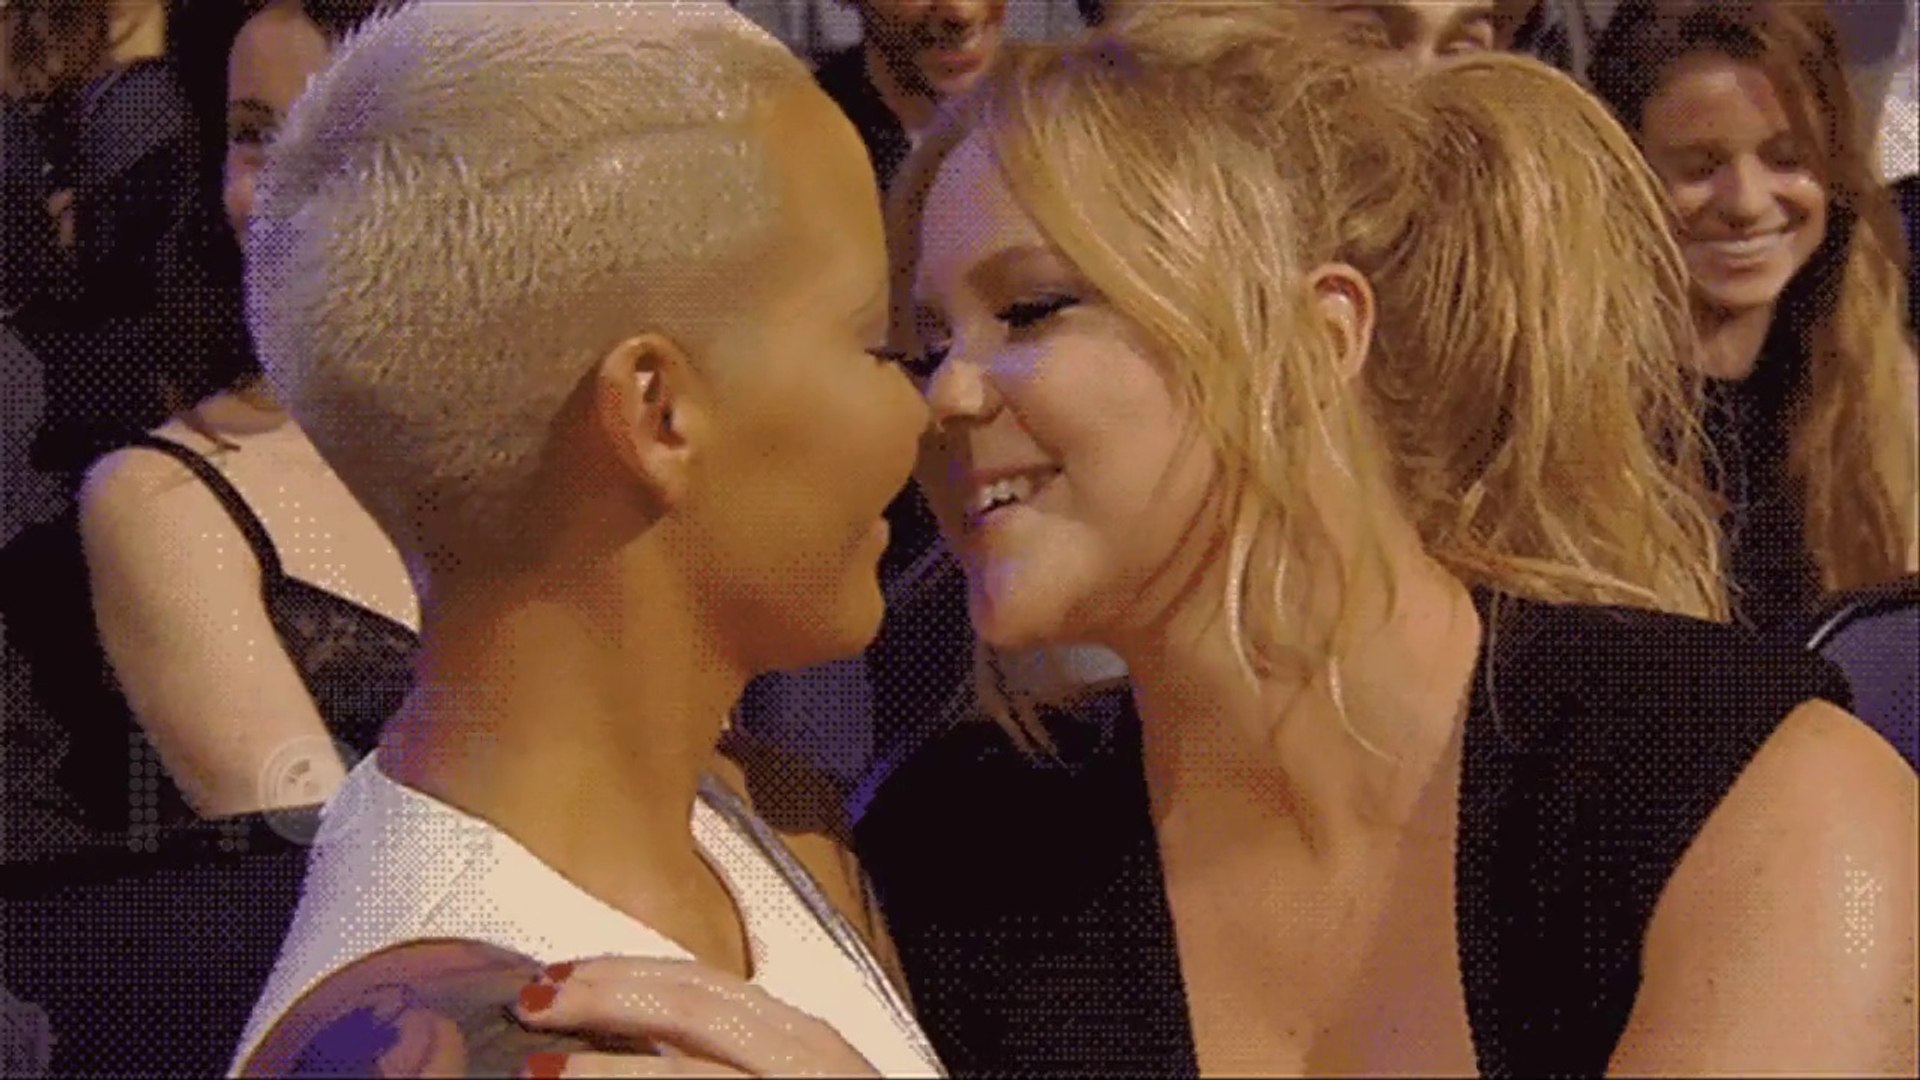 Amy Schumer Lesbian Bdsm - Amber Rose-Kissing-Amy Schumer At MTV Movie Awards 2015 - video Dailymotion